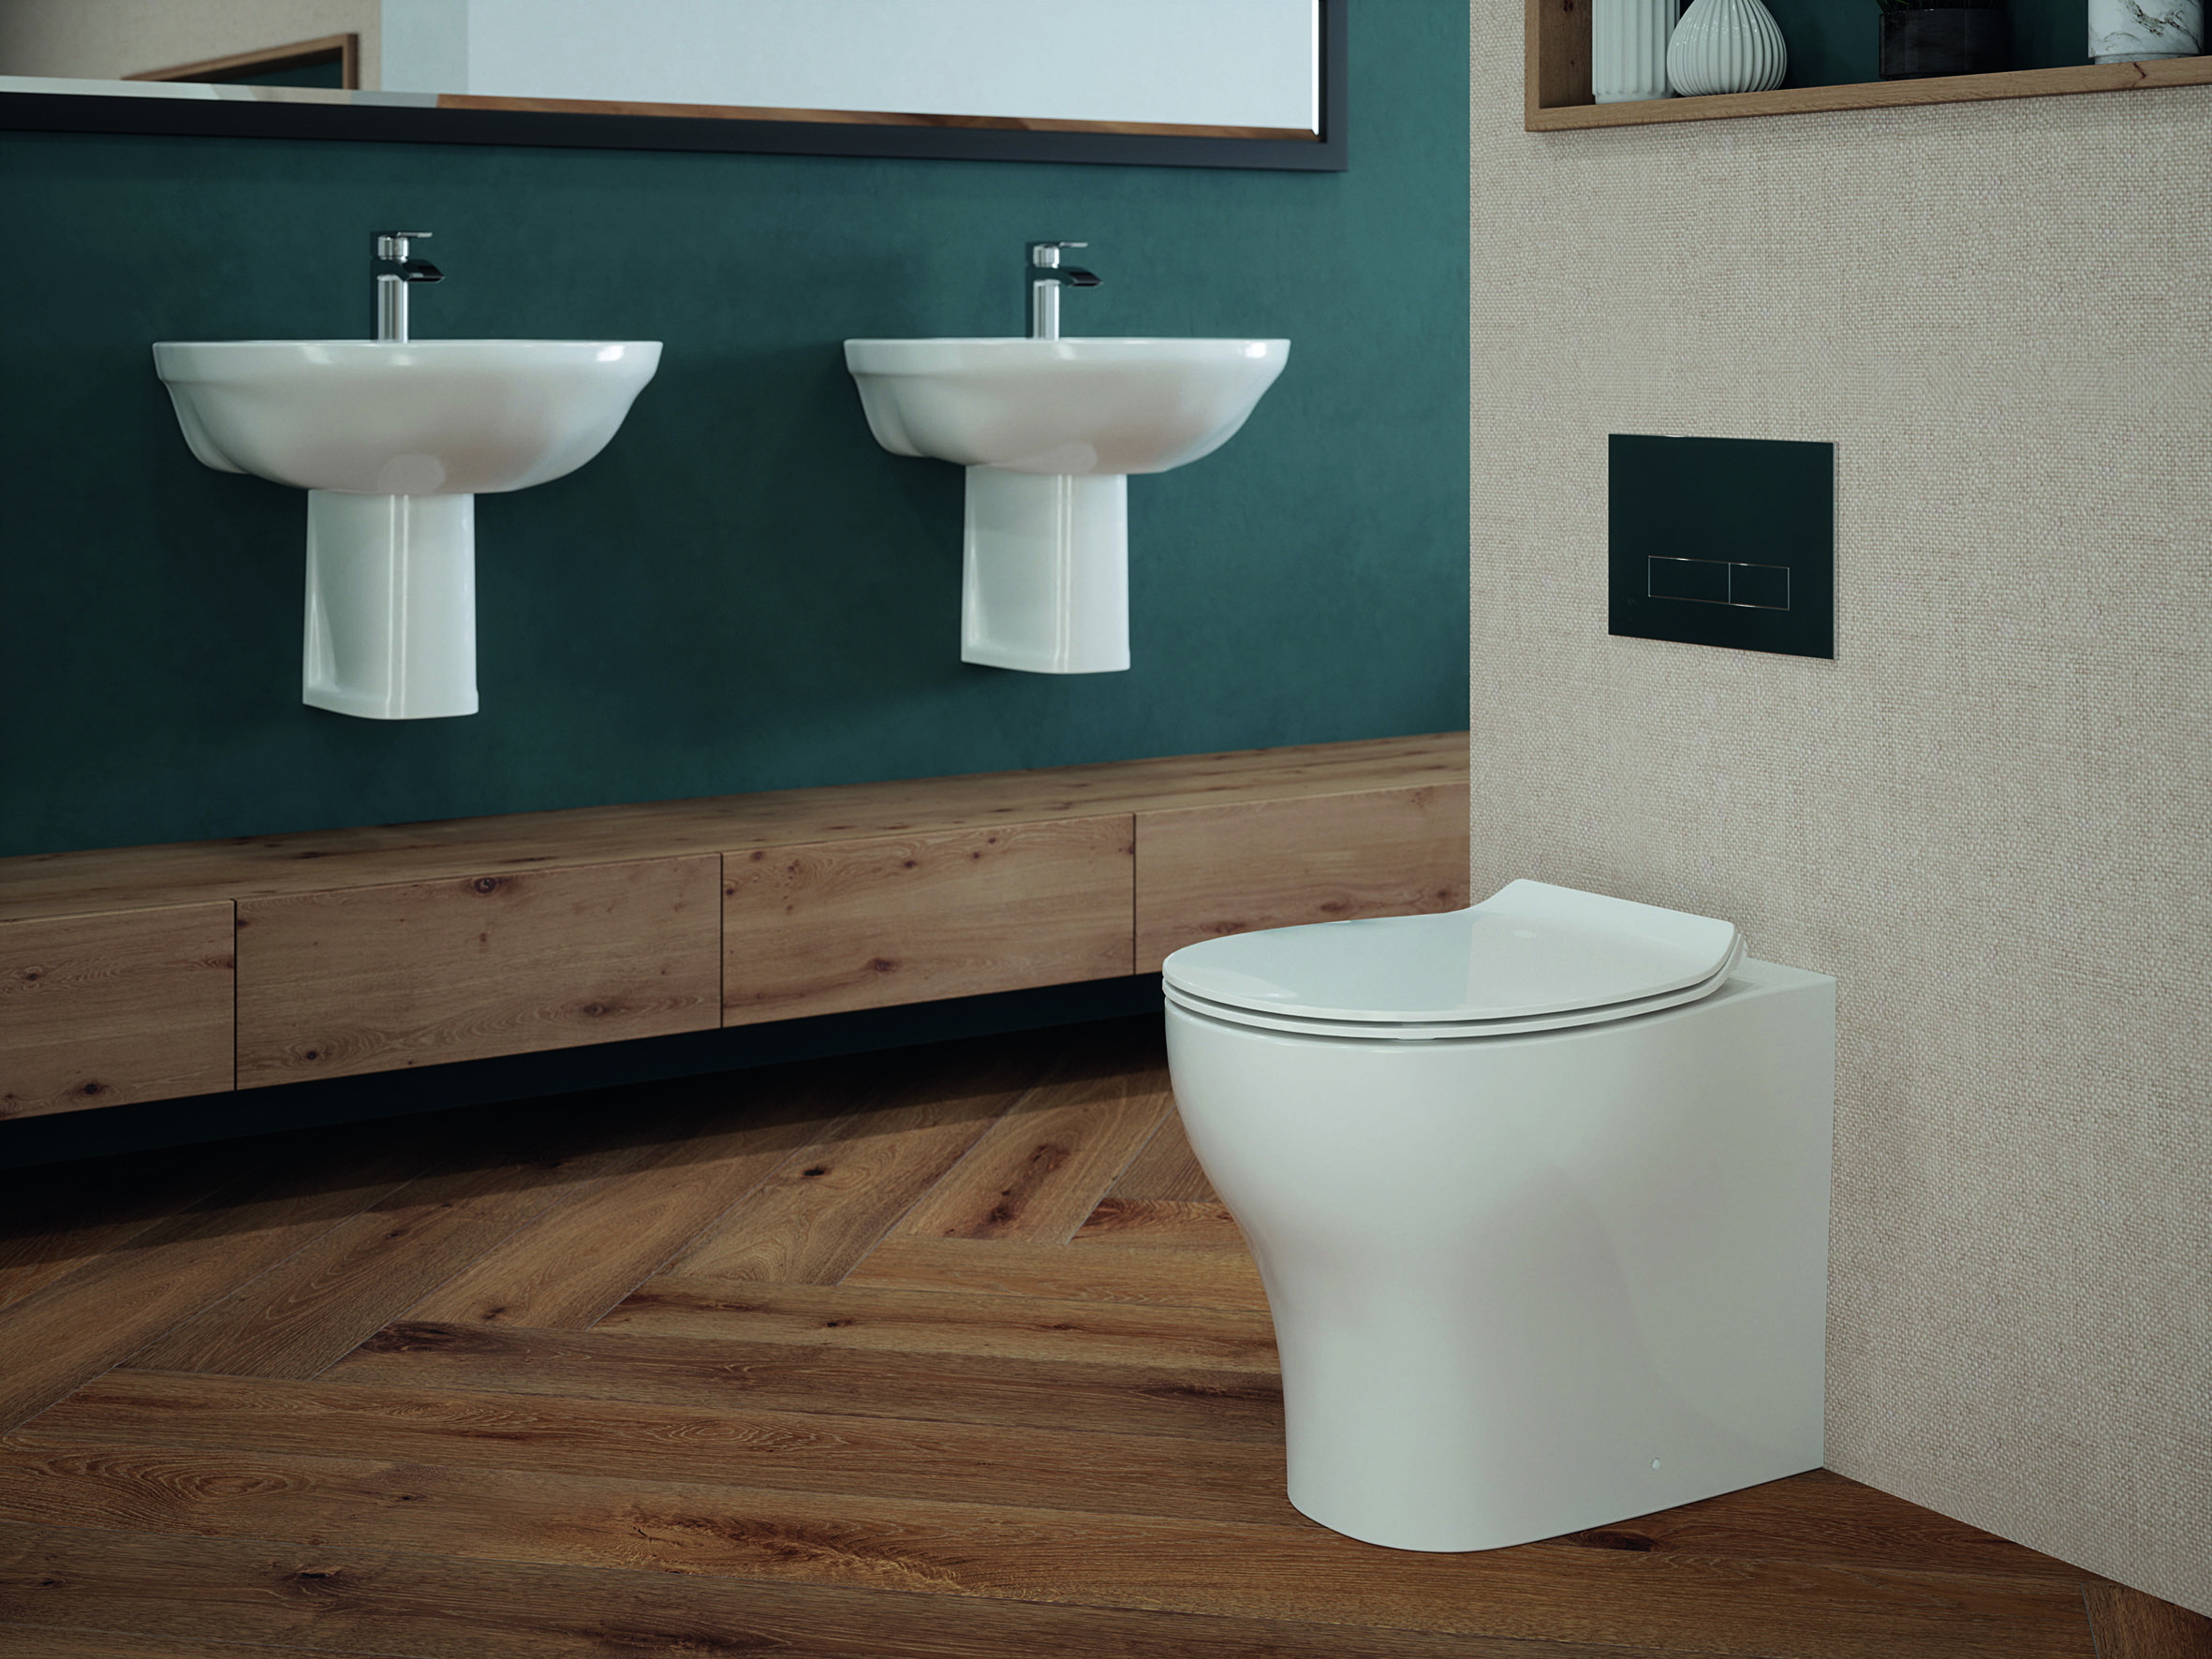 Affordable luxury with Whiteville Ceramics new DELTA Collection @whiteville_uk